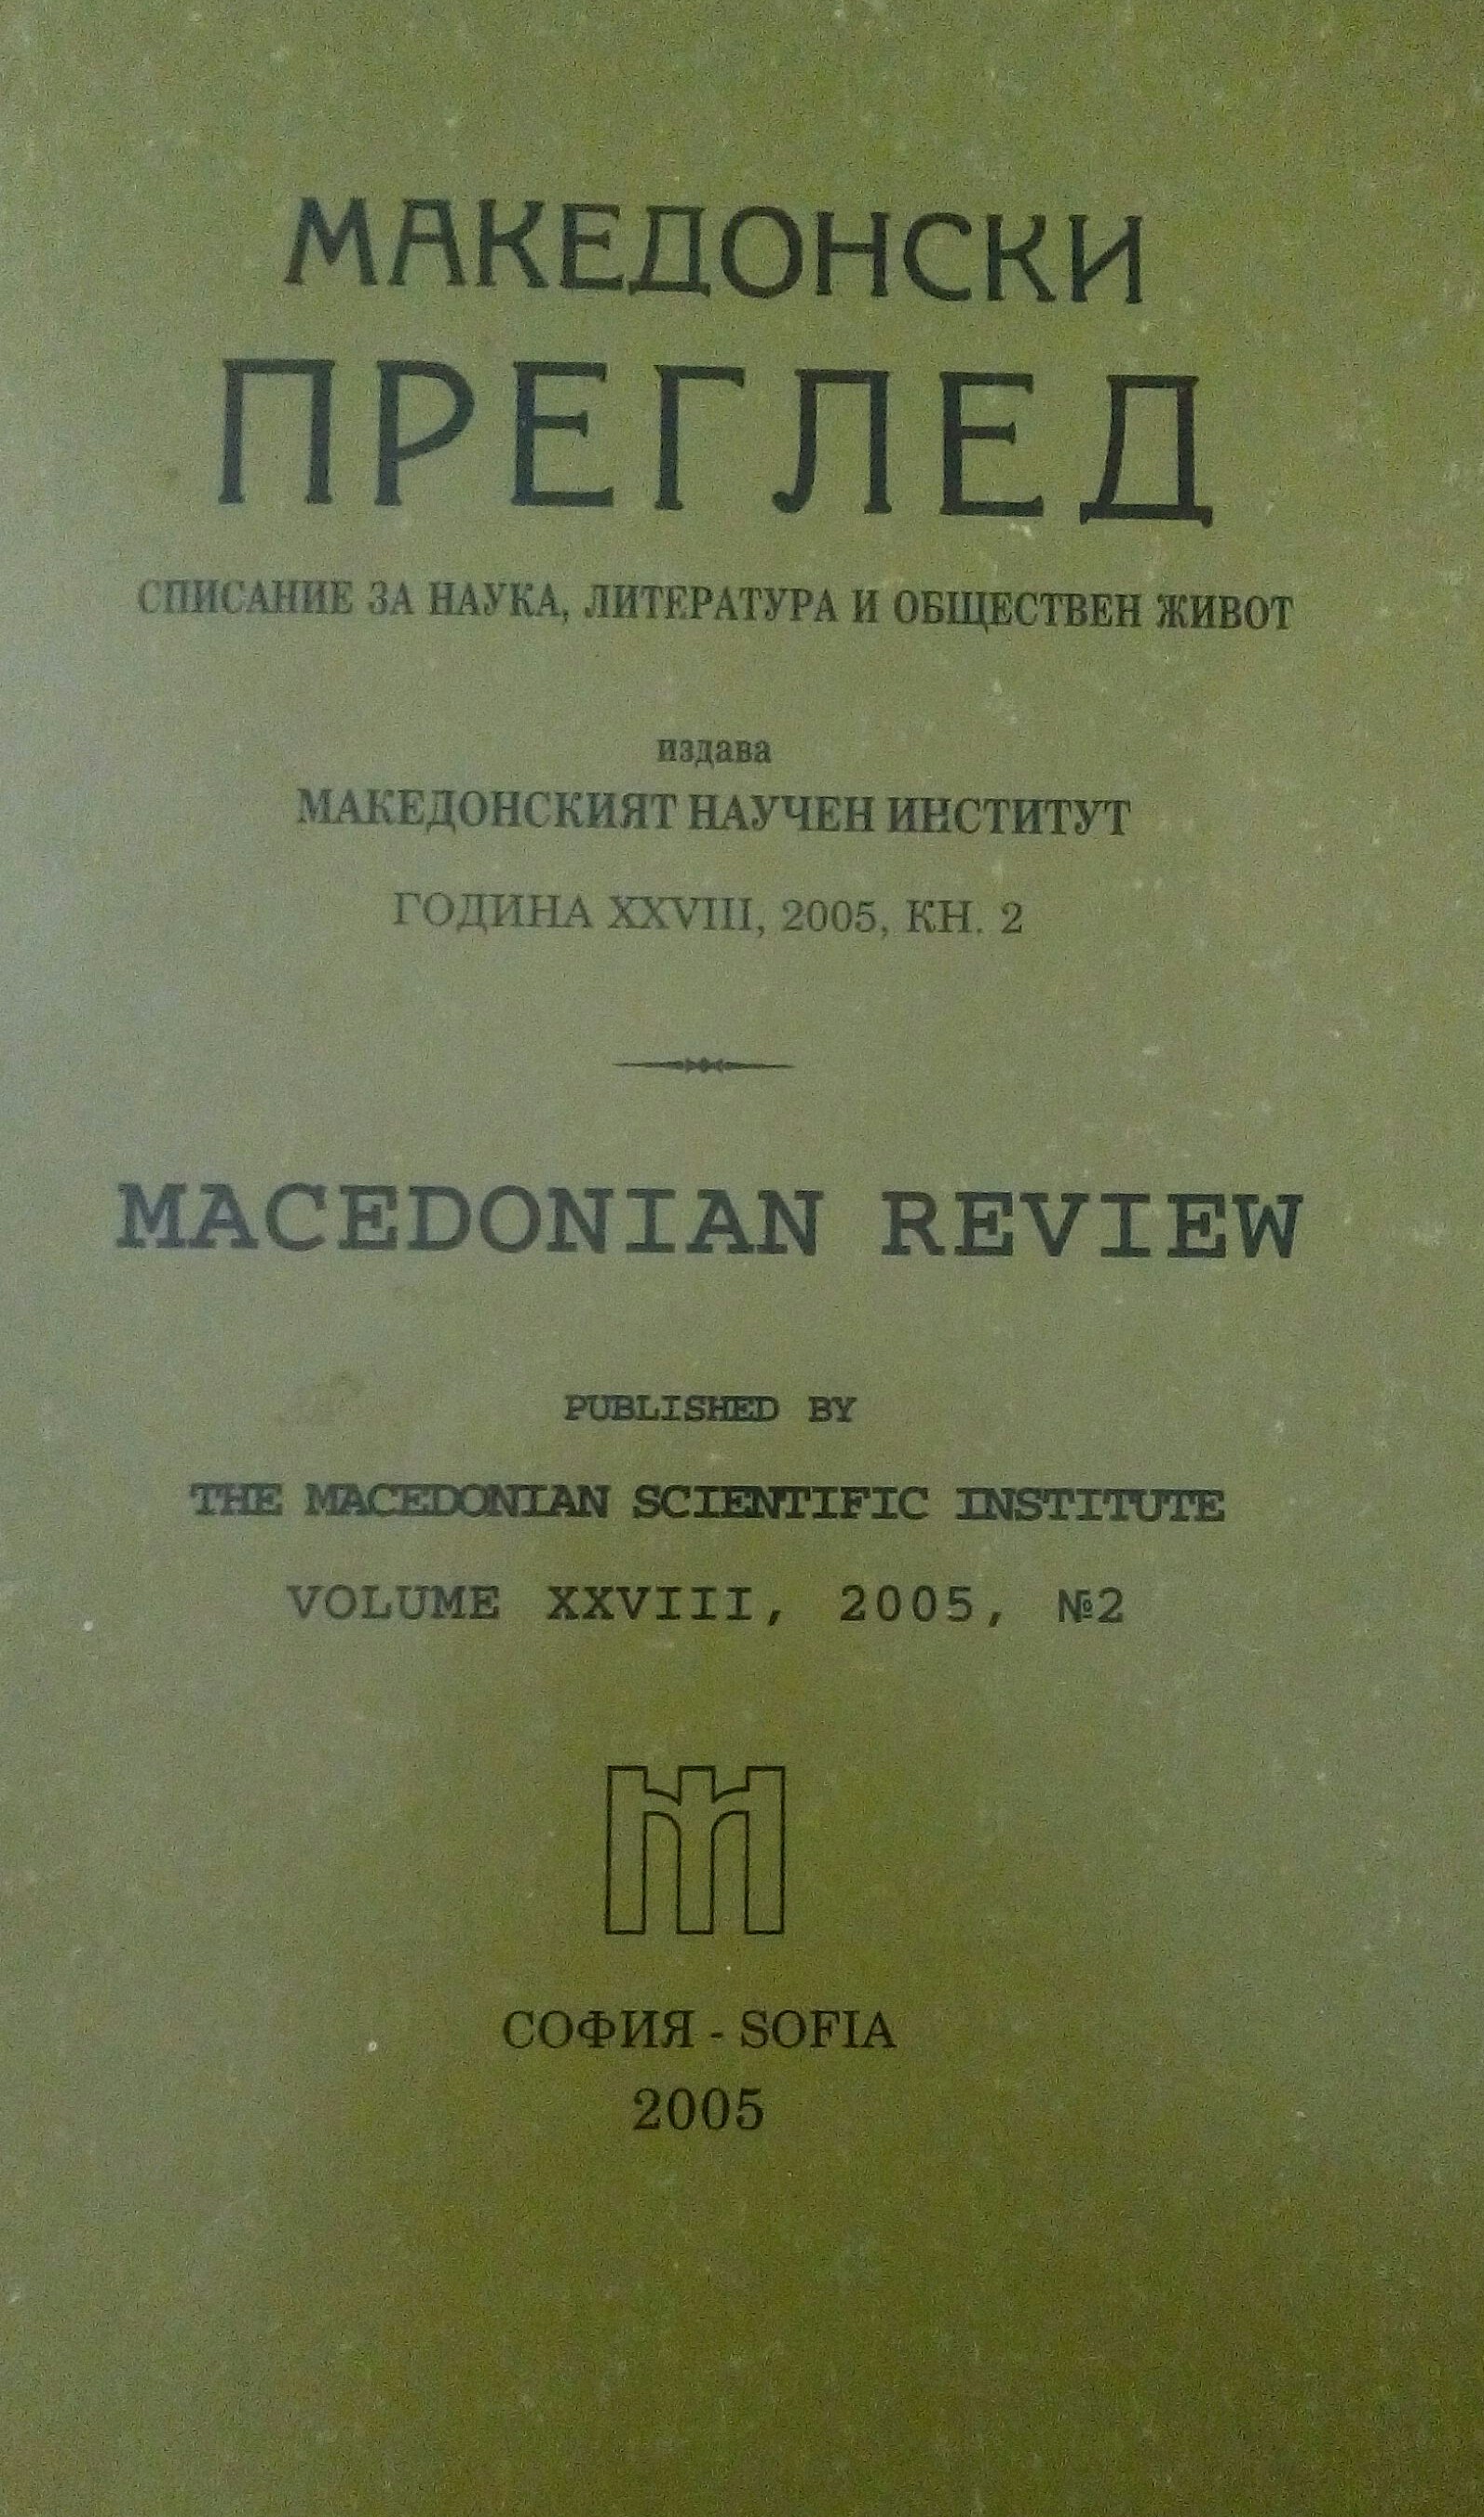 Valentin Stankov. On the Bulgarian literary language during the Revival. Scientific facts and psudo-scientific theses. Sofia, 2003, 117 p. Review by Dr. Tatyana Alexandrova Cover Image